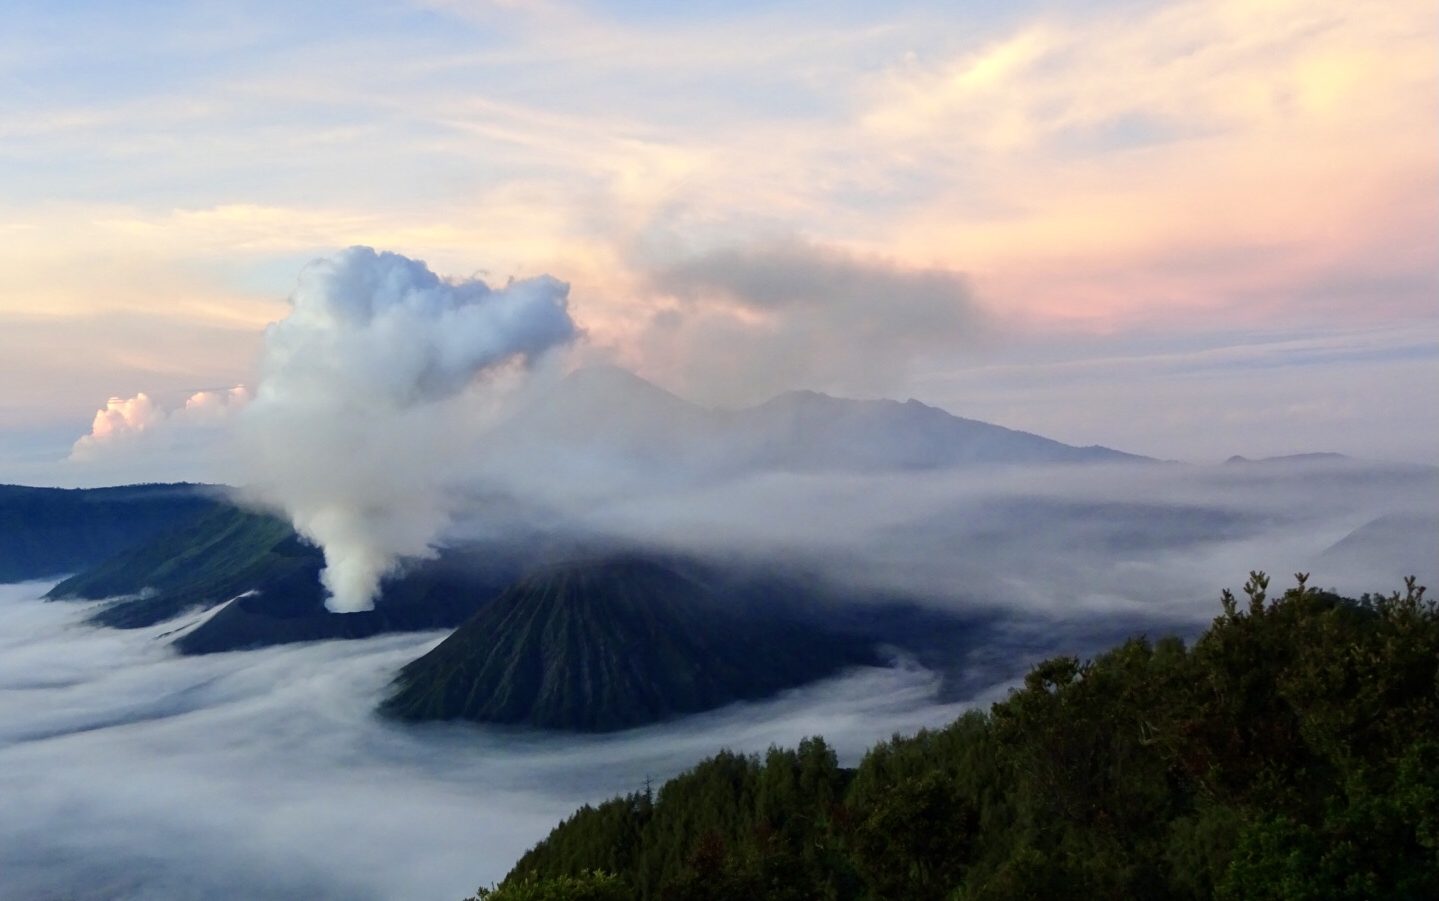 View of 2,329 metre high Mount Bromo, an active somma volcano within the Tengger mountains in East Java, Indonesia.